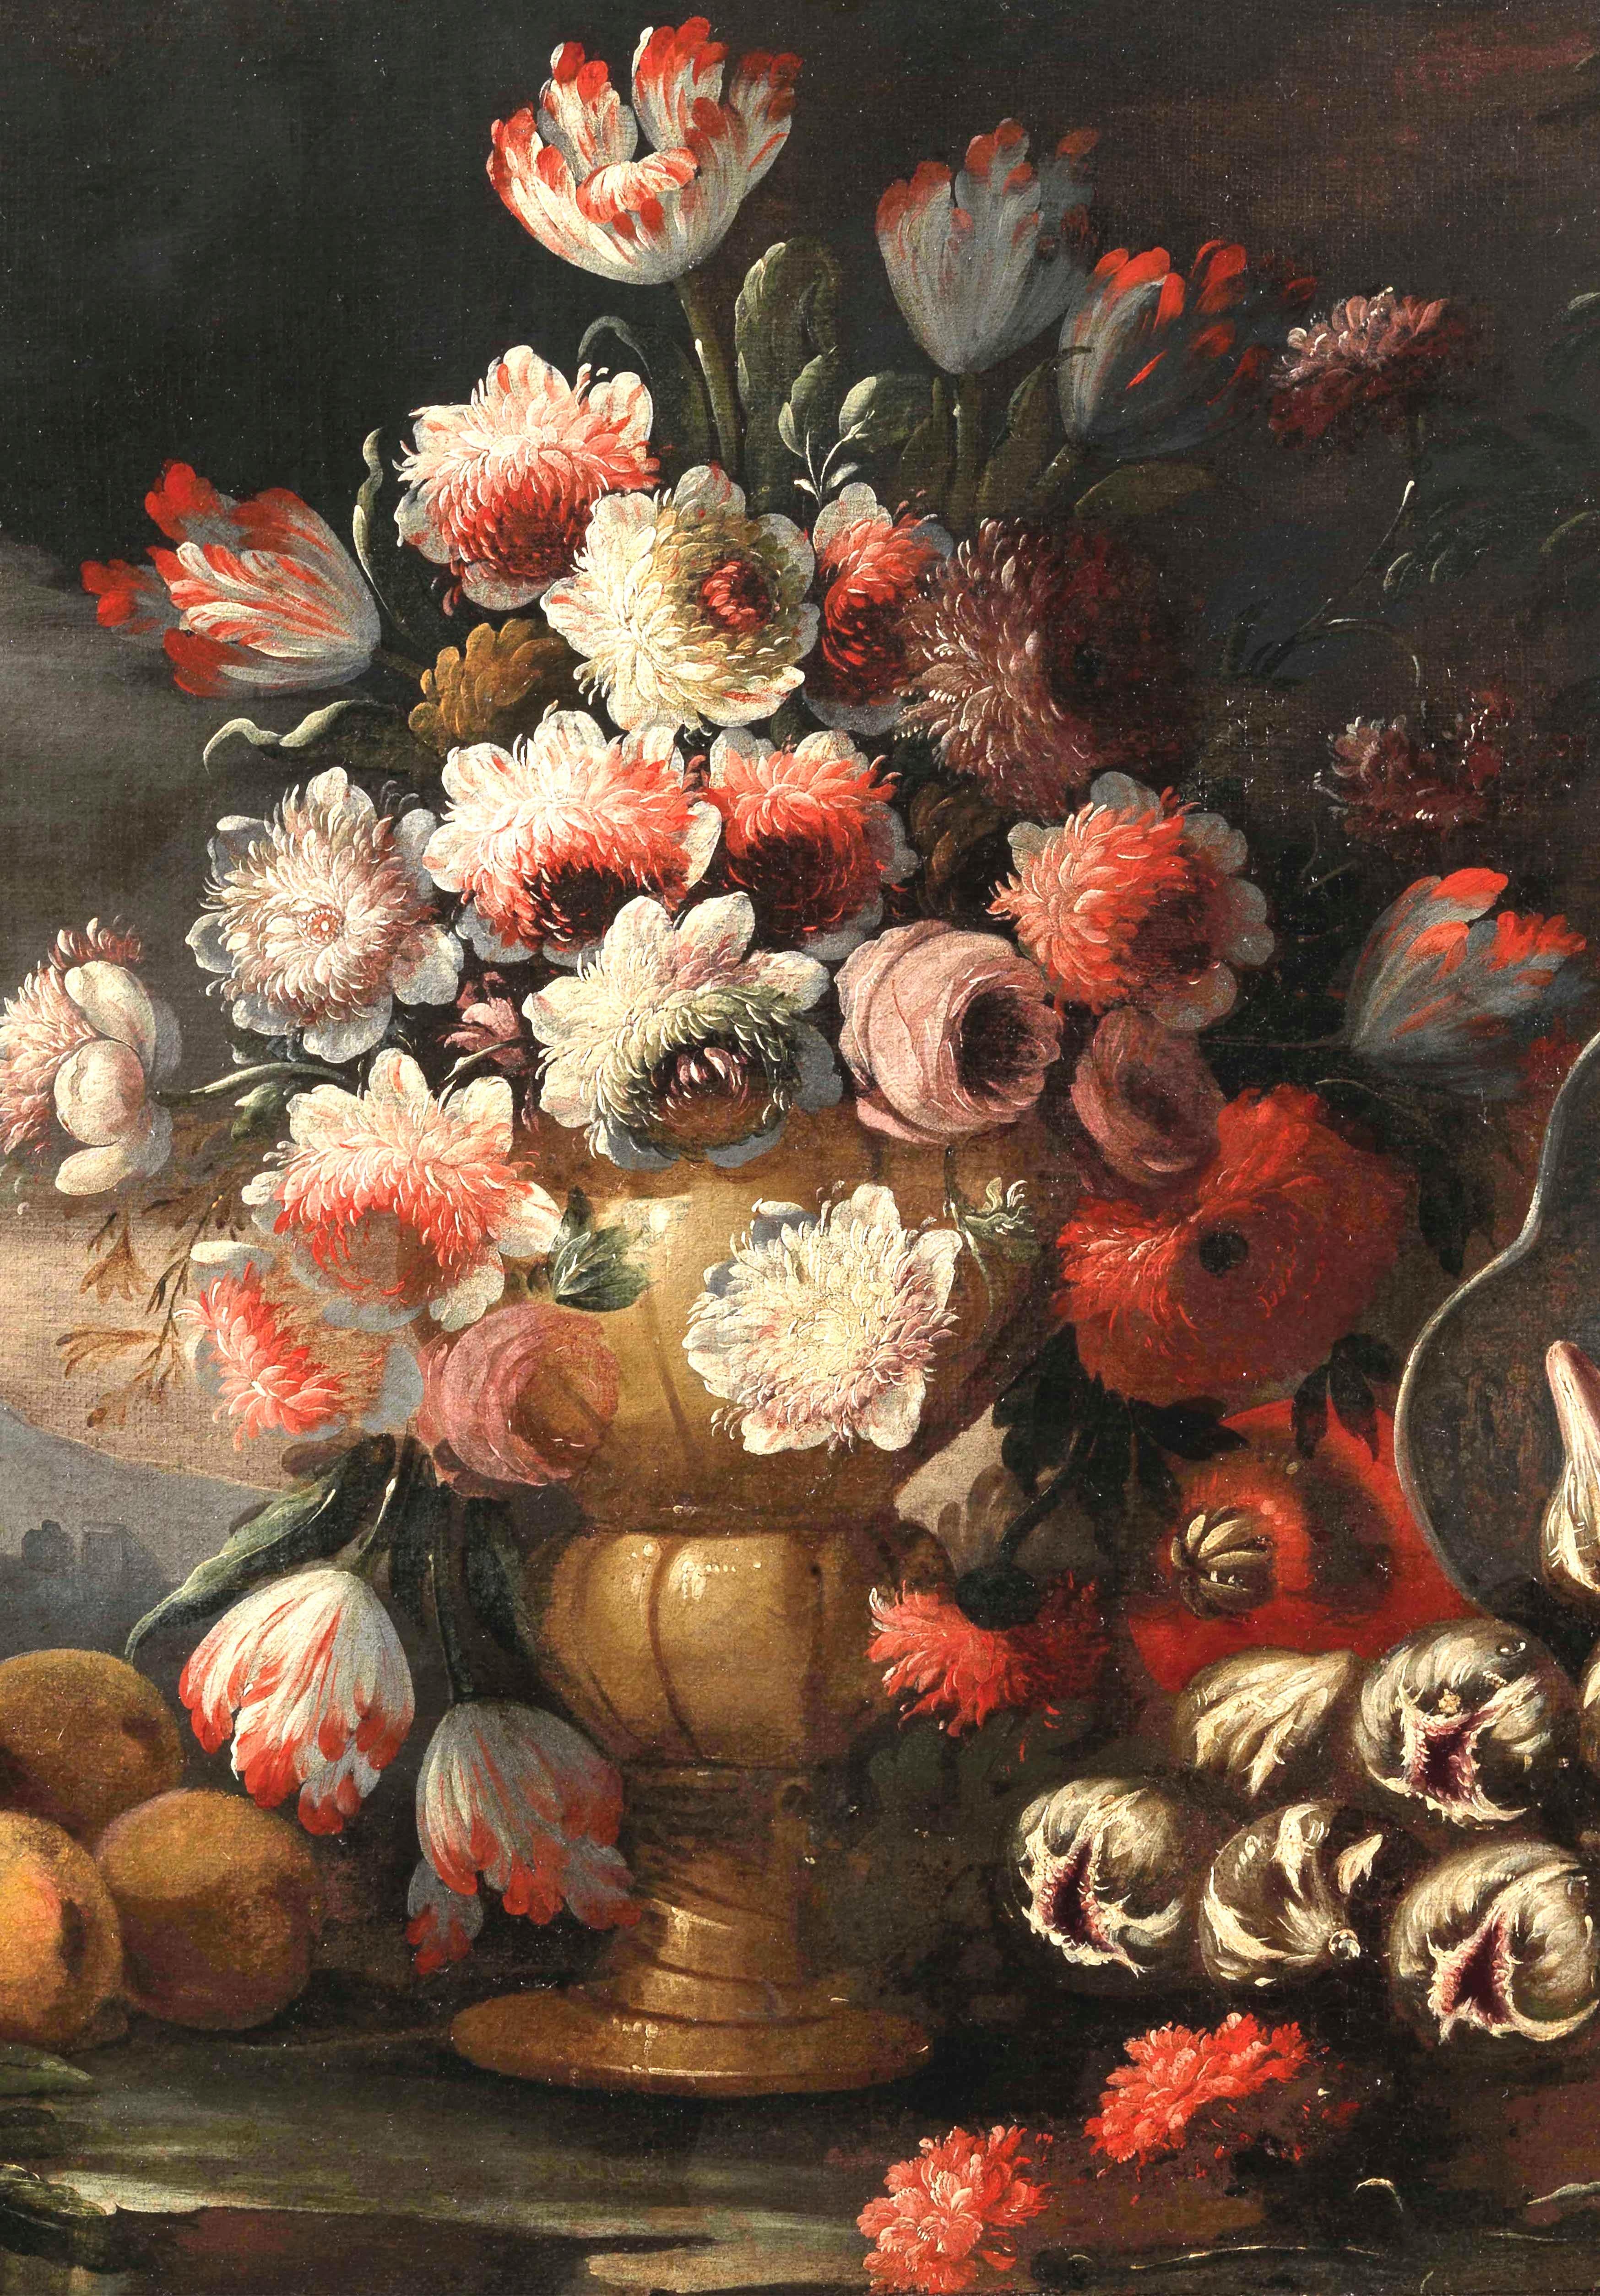 Two Exceptional Italian 18th Century Still-Life Paintings by Lopez & Houbraken 1